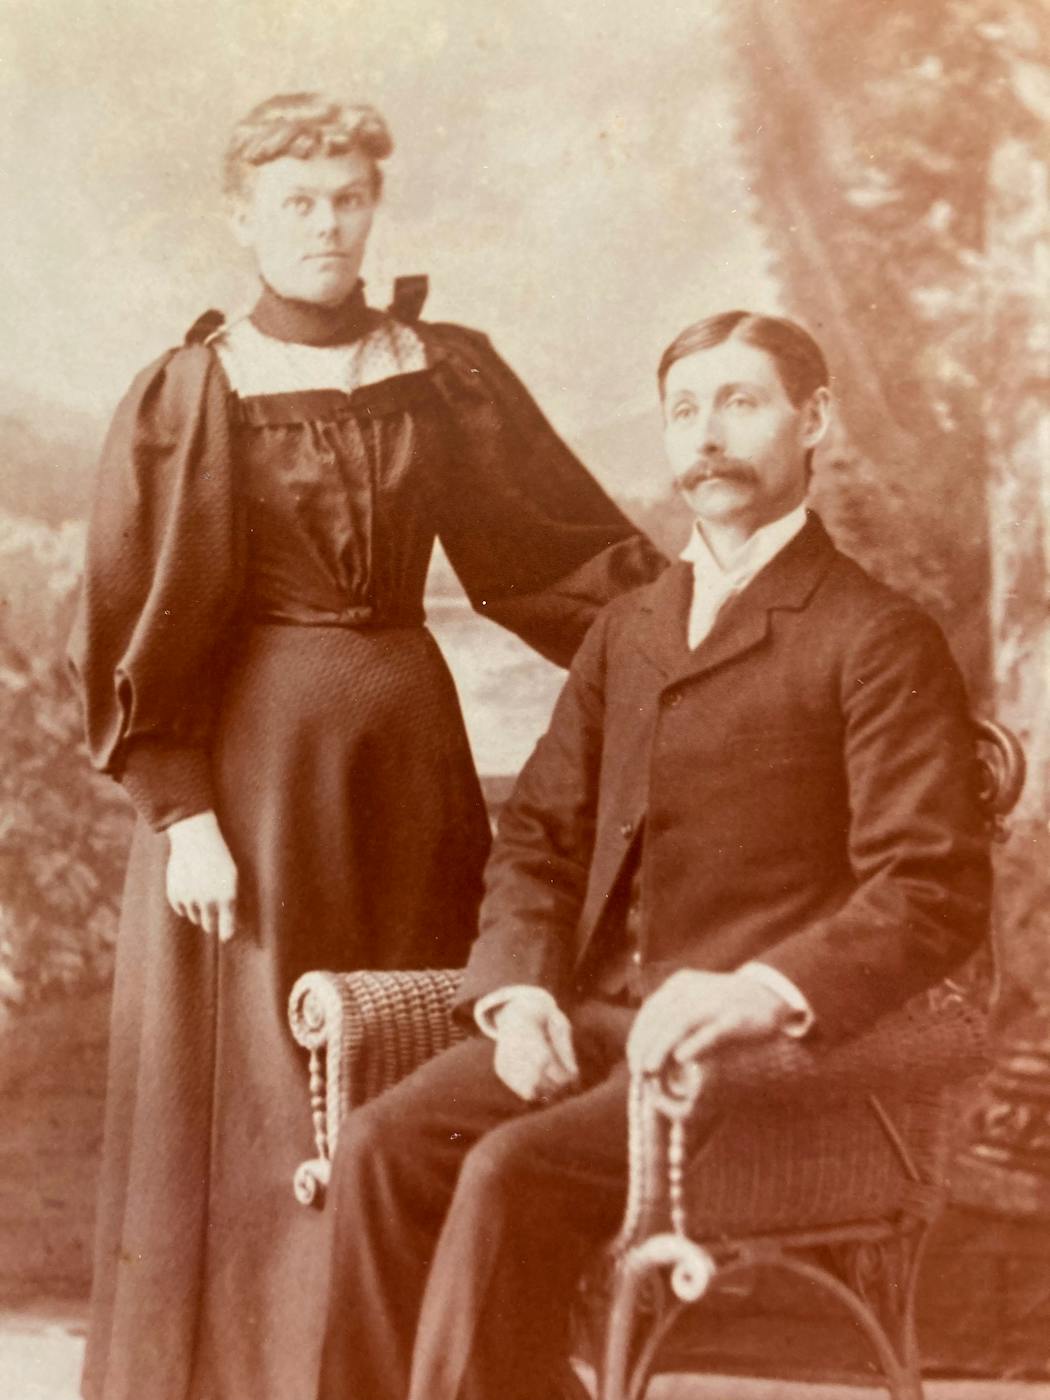 Reader Paul Welvang's great grandparents, Peter and Anna Welvang. Peter immigrated to America from Norway. Anna was born in Wisconsin.